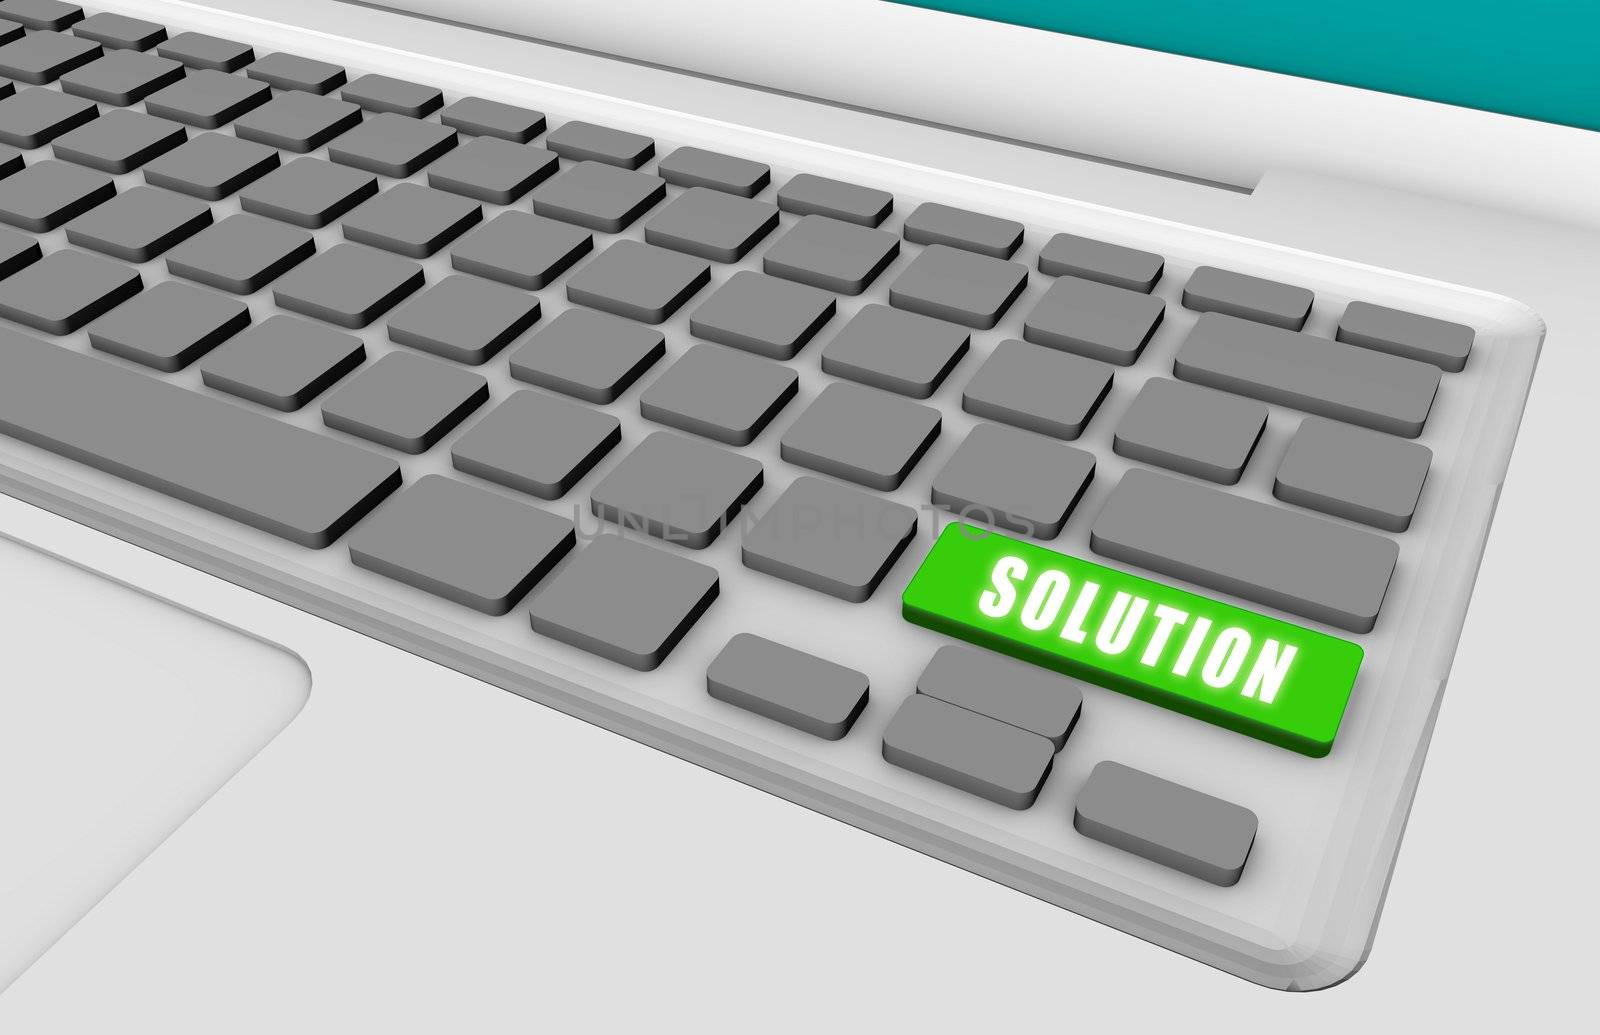 Easy Solutions with a Solution Keyboard Button